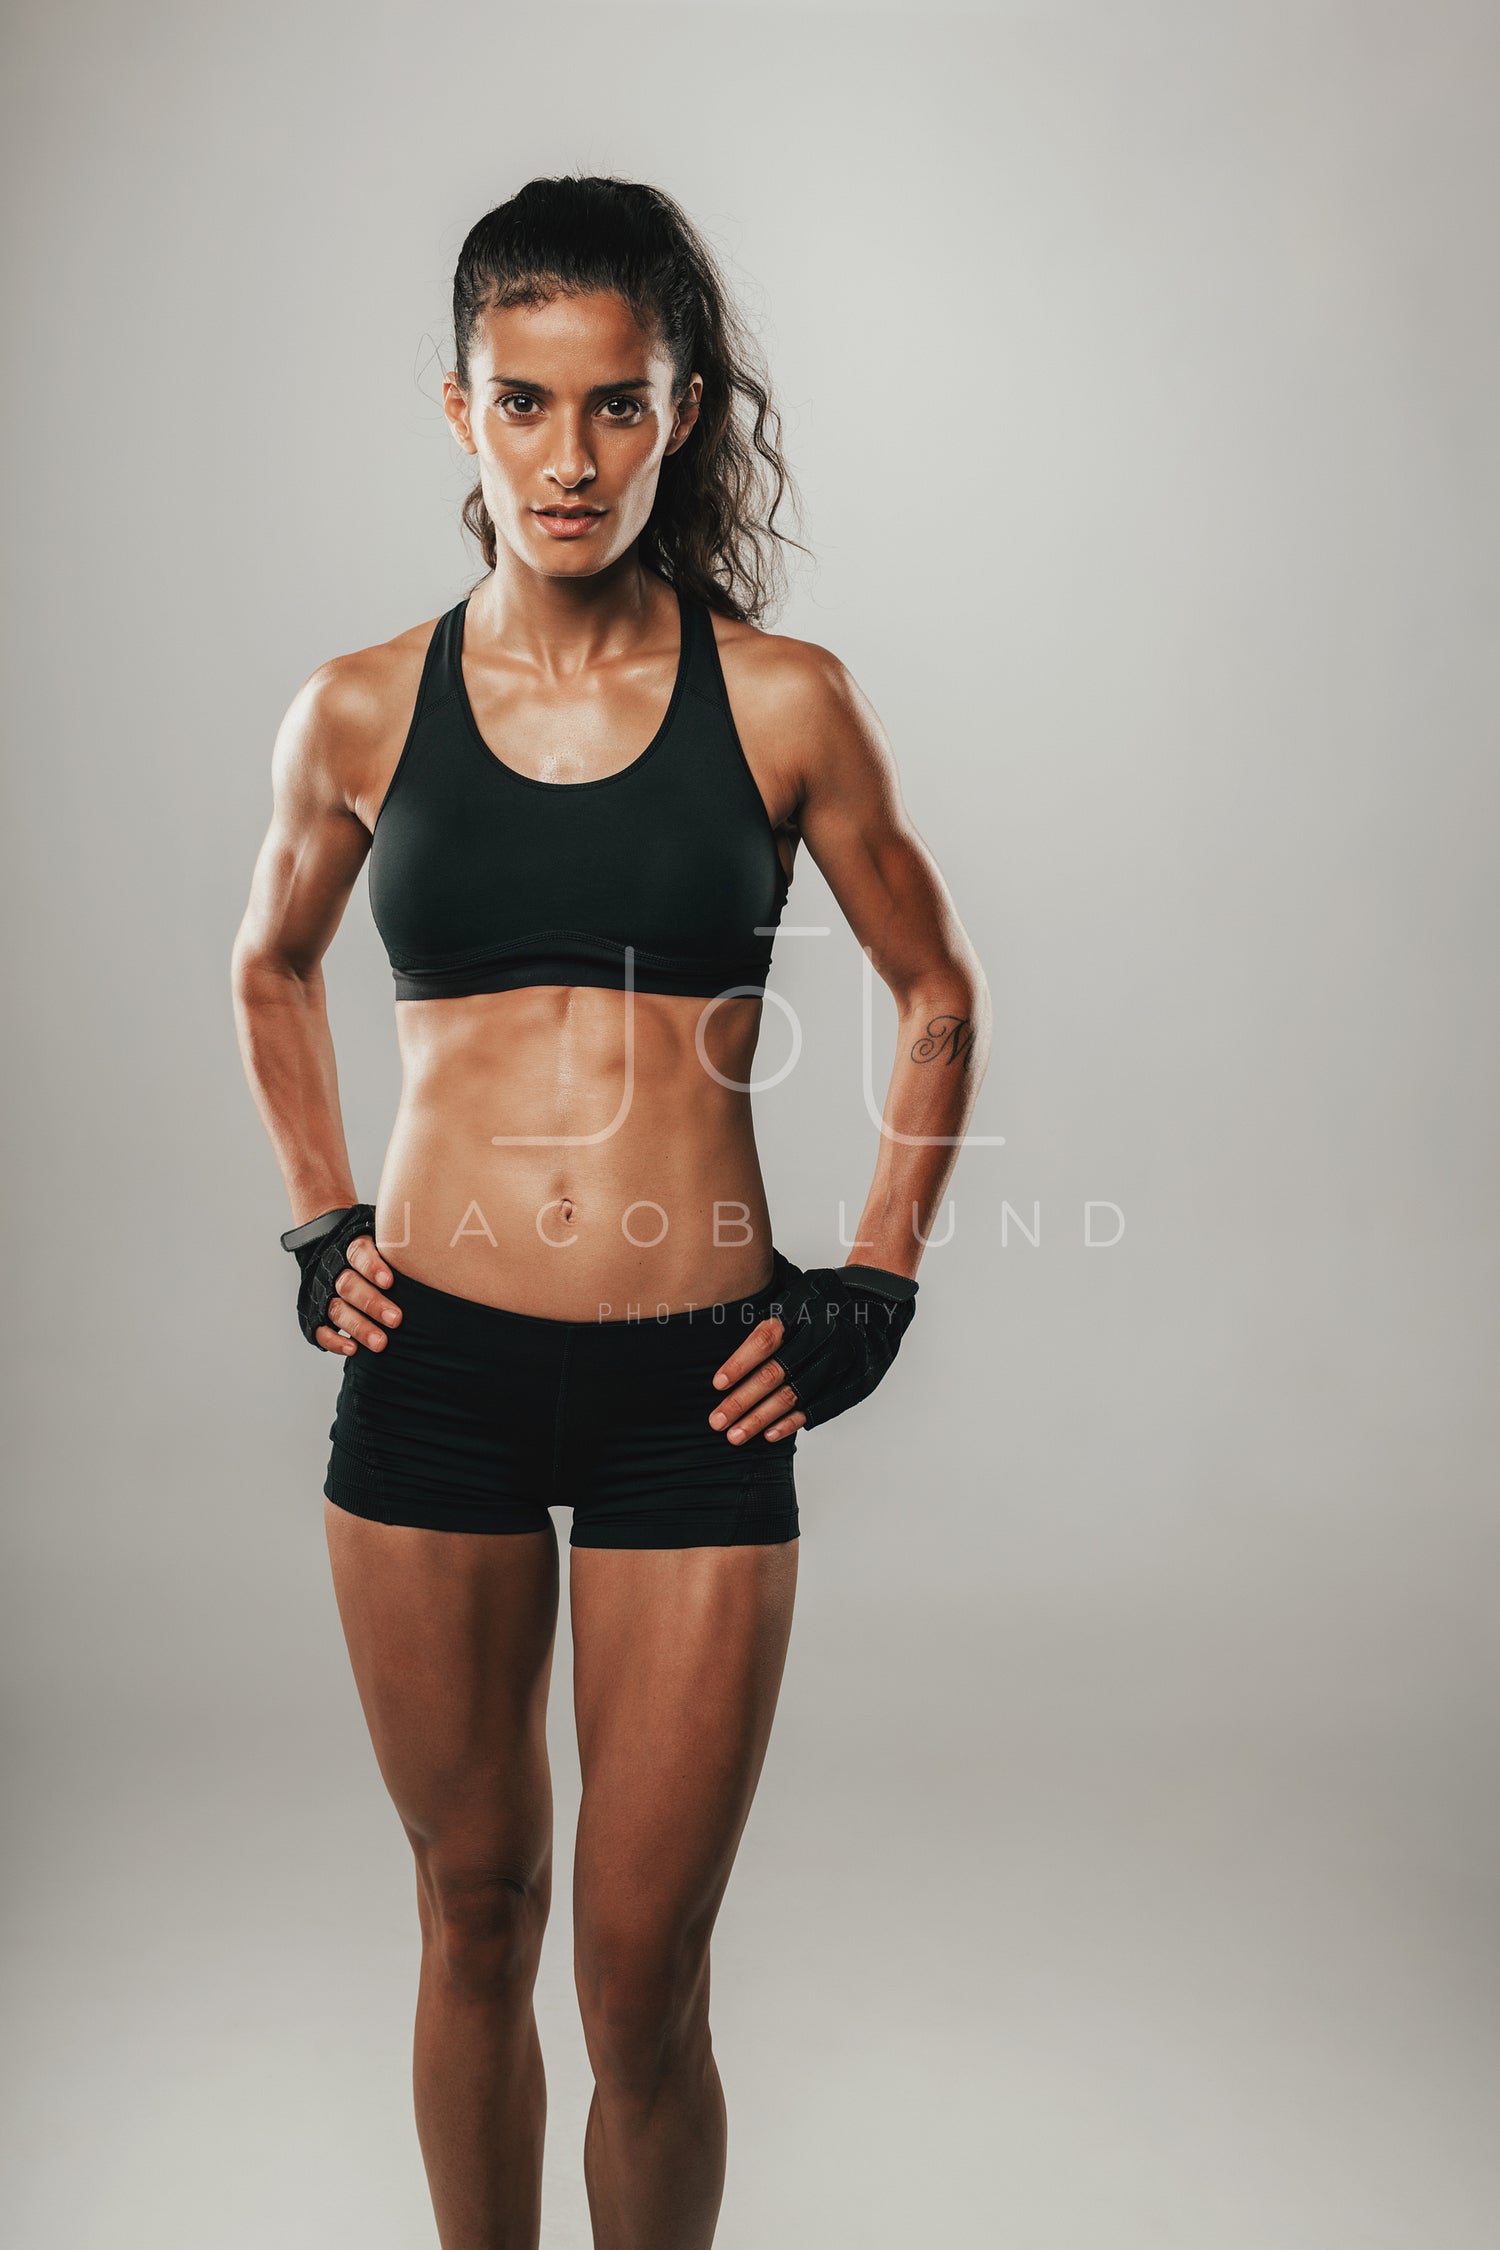 Strong fit young woman in black sportswear – Jacob Lund Photography Store-  premium stock photo